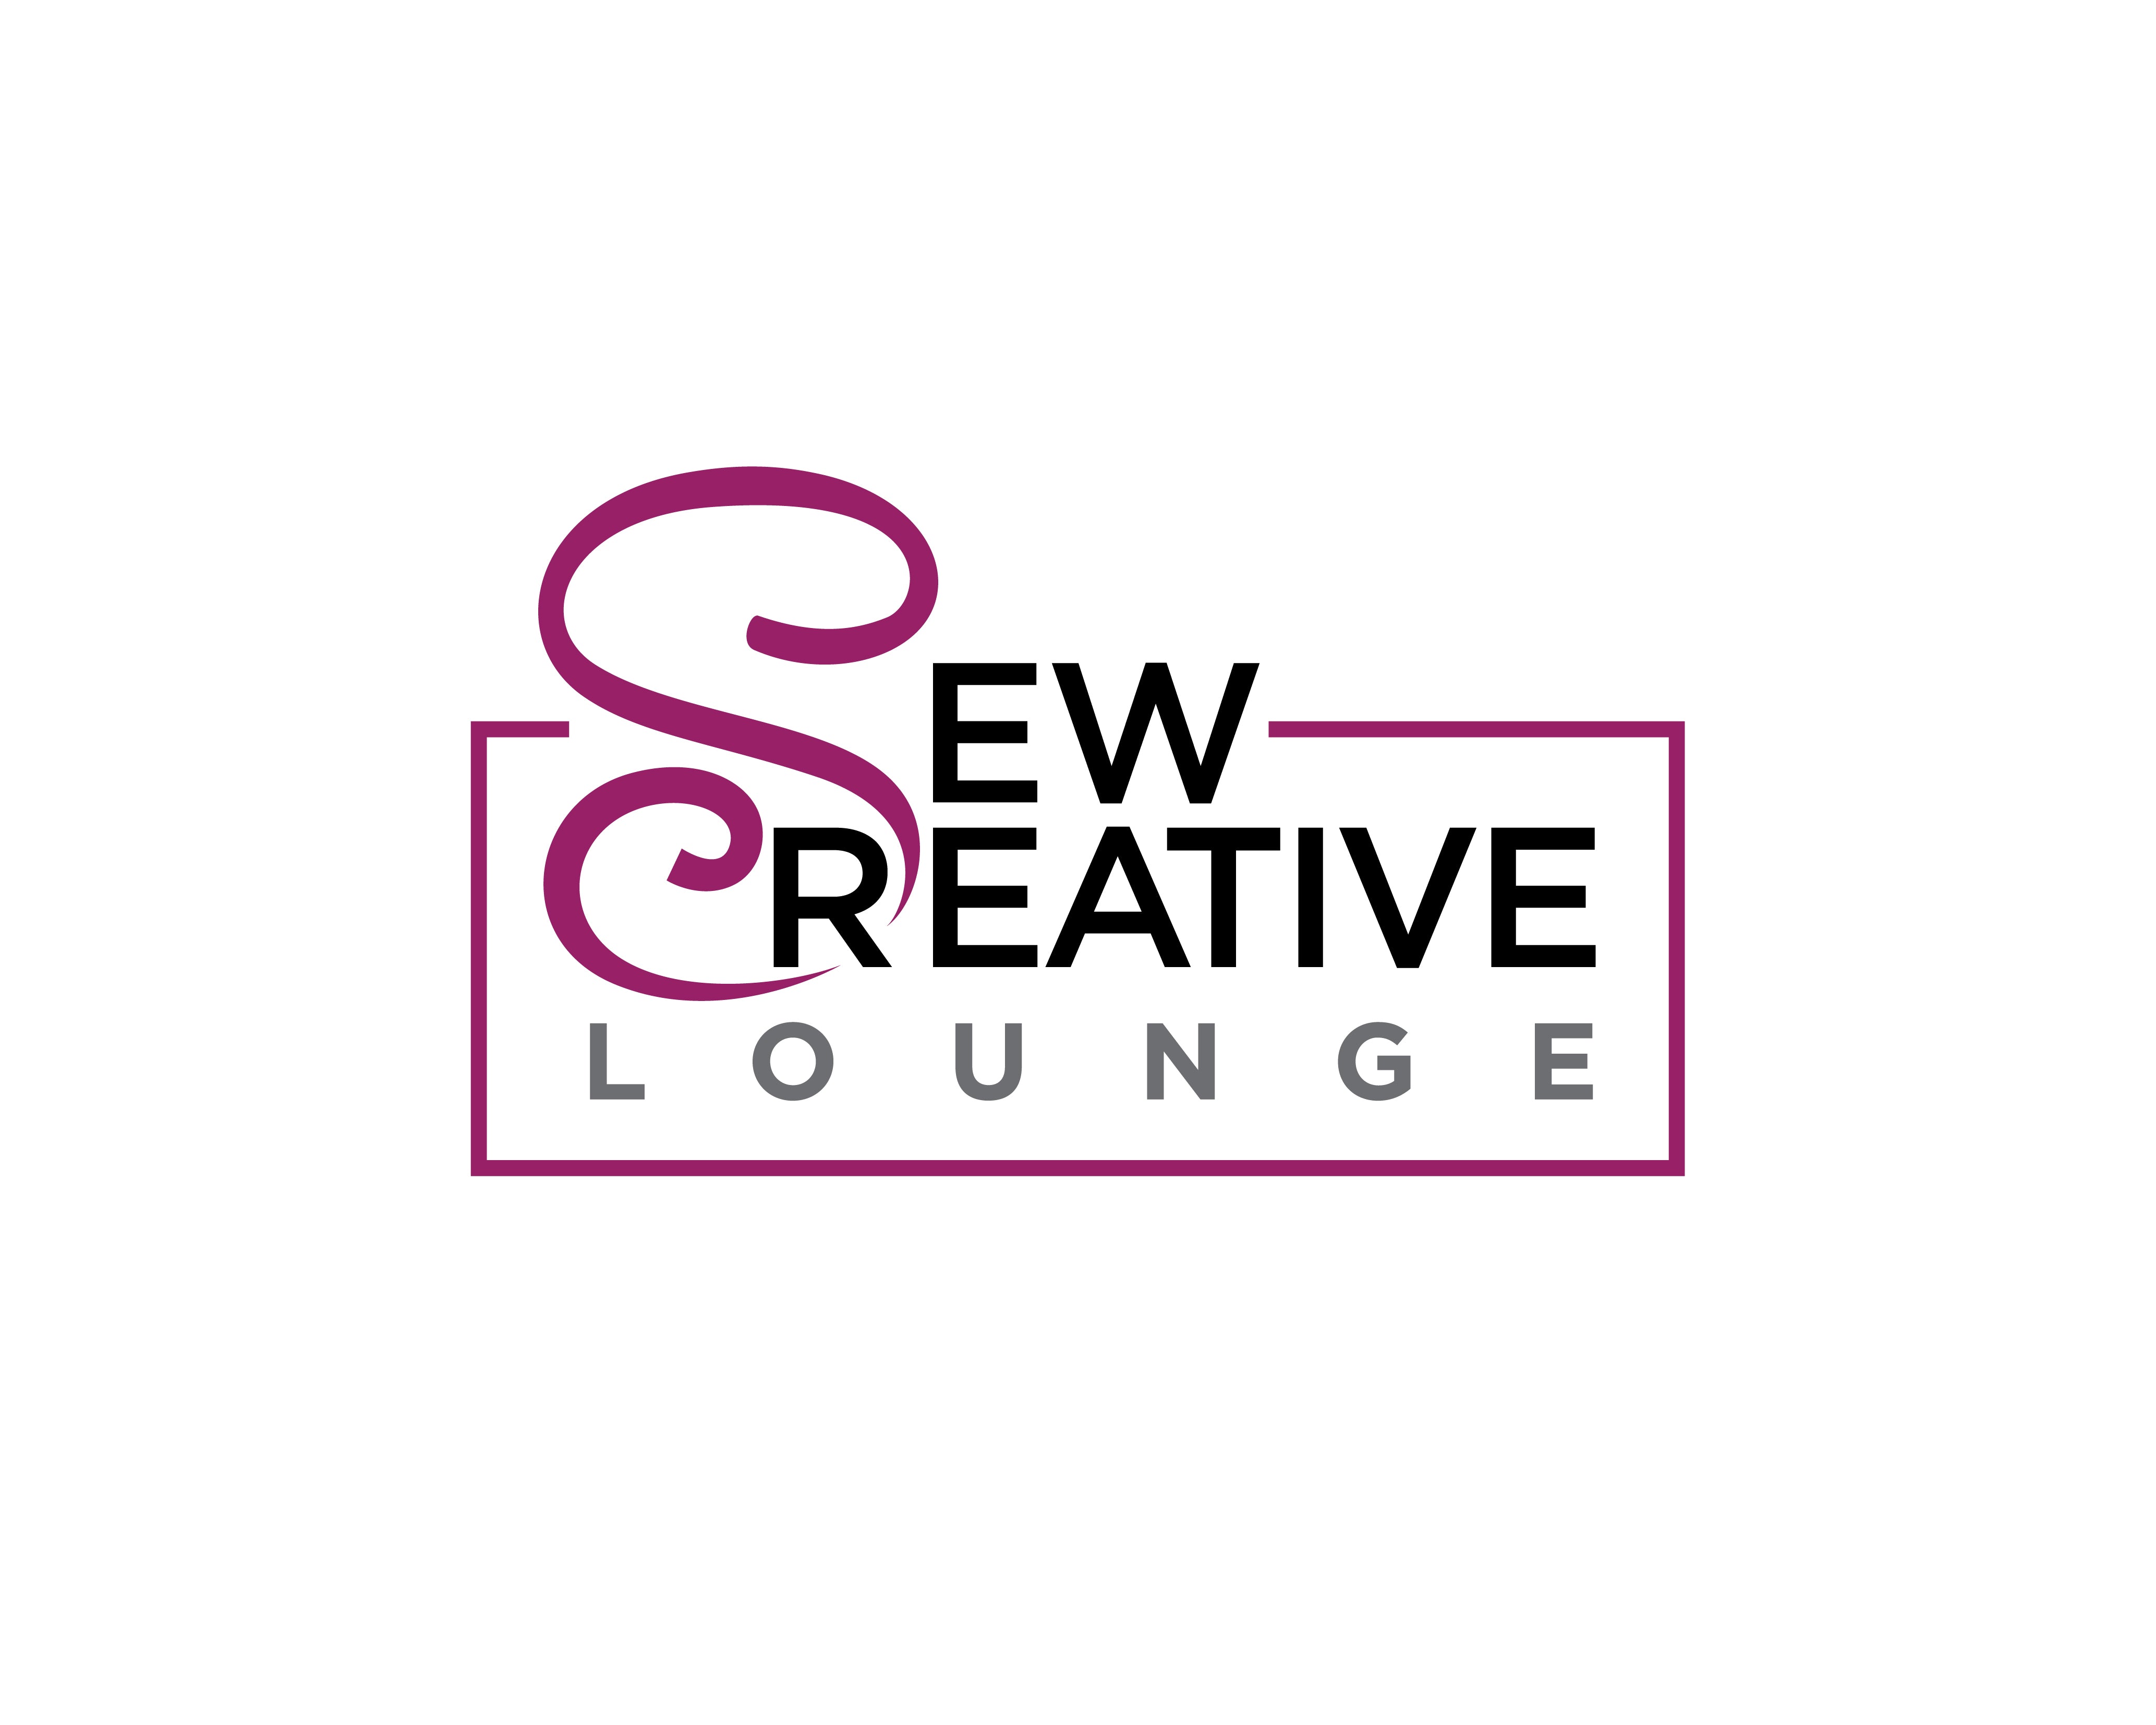 Support Sew Creative Lounge